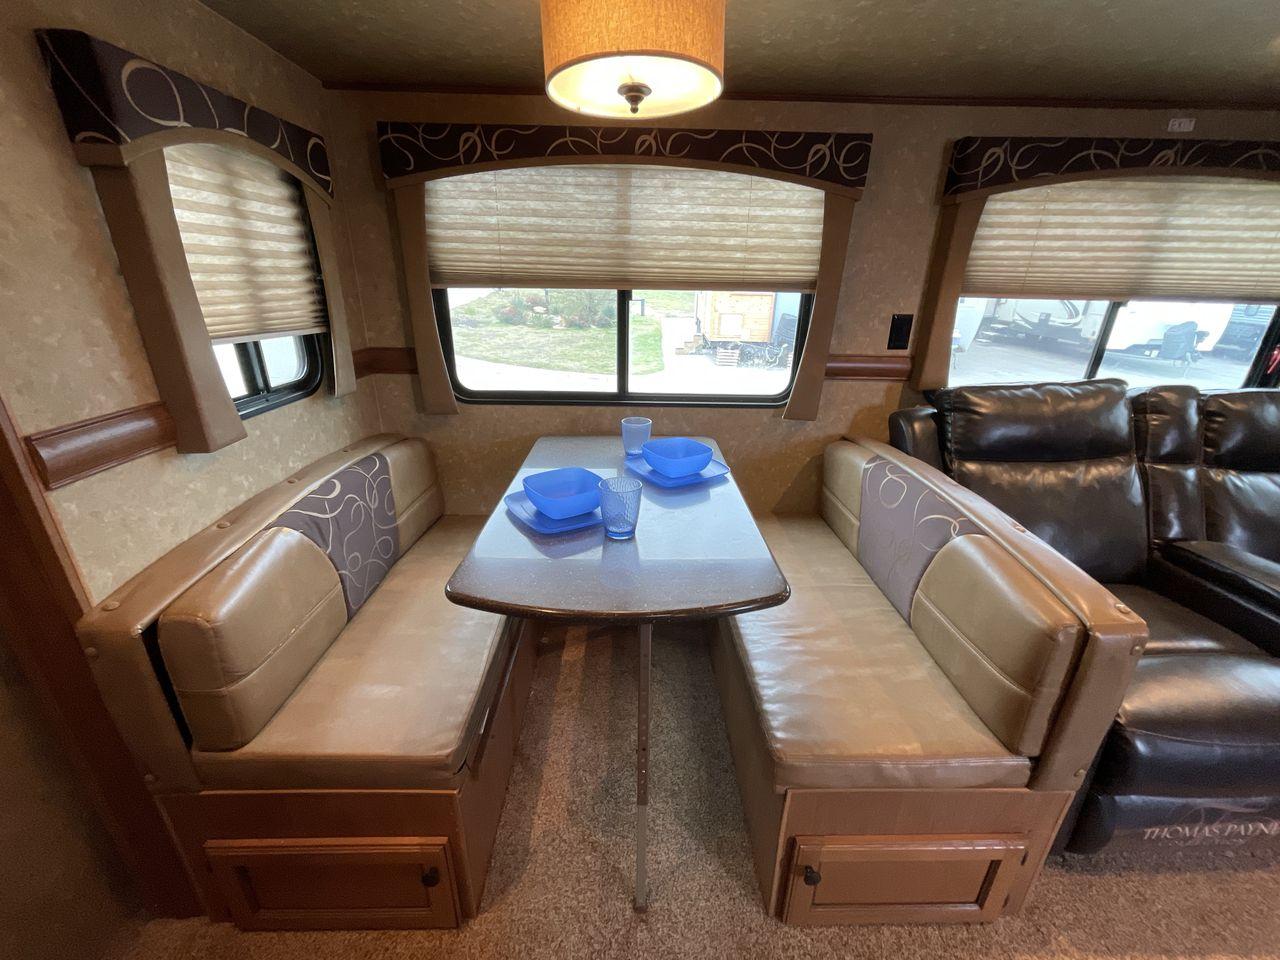 2015 CROSSROADS SUNSET TRAIL RESERVE (4V0FC2624FB) , Length: 30.17 ft | Dry Weight: 6,401 lbs | Gross Weight: 9,542 lbs | Slides: 2 transmission, located at 4319 N Main Street, Cleburne, TX, 76033, (817) 221-0660, 32.435829, -97.384178 - This model has the right mix of space and maneuverability, with a length of 30 feet and a dry weight of 6,401 pounds. With a strong aluminum frame and fiberglass sidewalls, it will last for a long time on the road, making it a great choice for travelers who want both style and dependability. The Sun - Photo #14